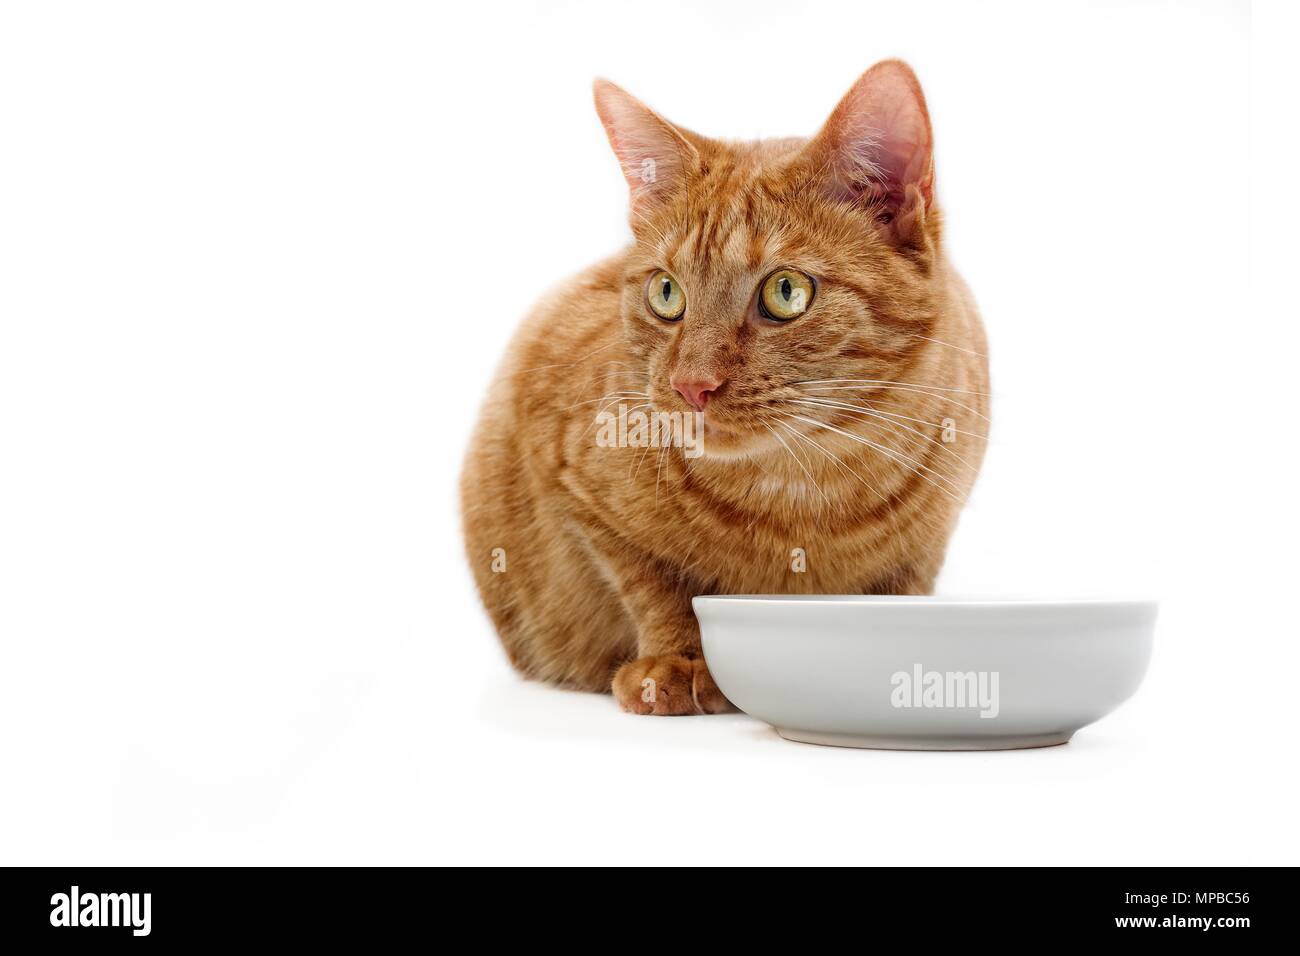 Ginger cat sitting beside a food bowl and looking sideways - Isloatede on white. Stock Photo